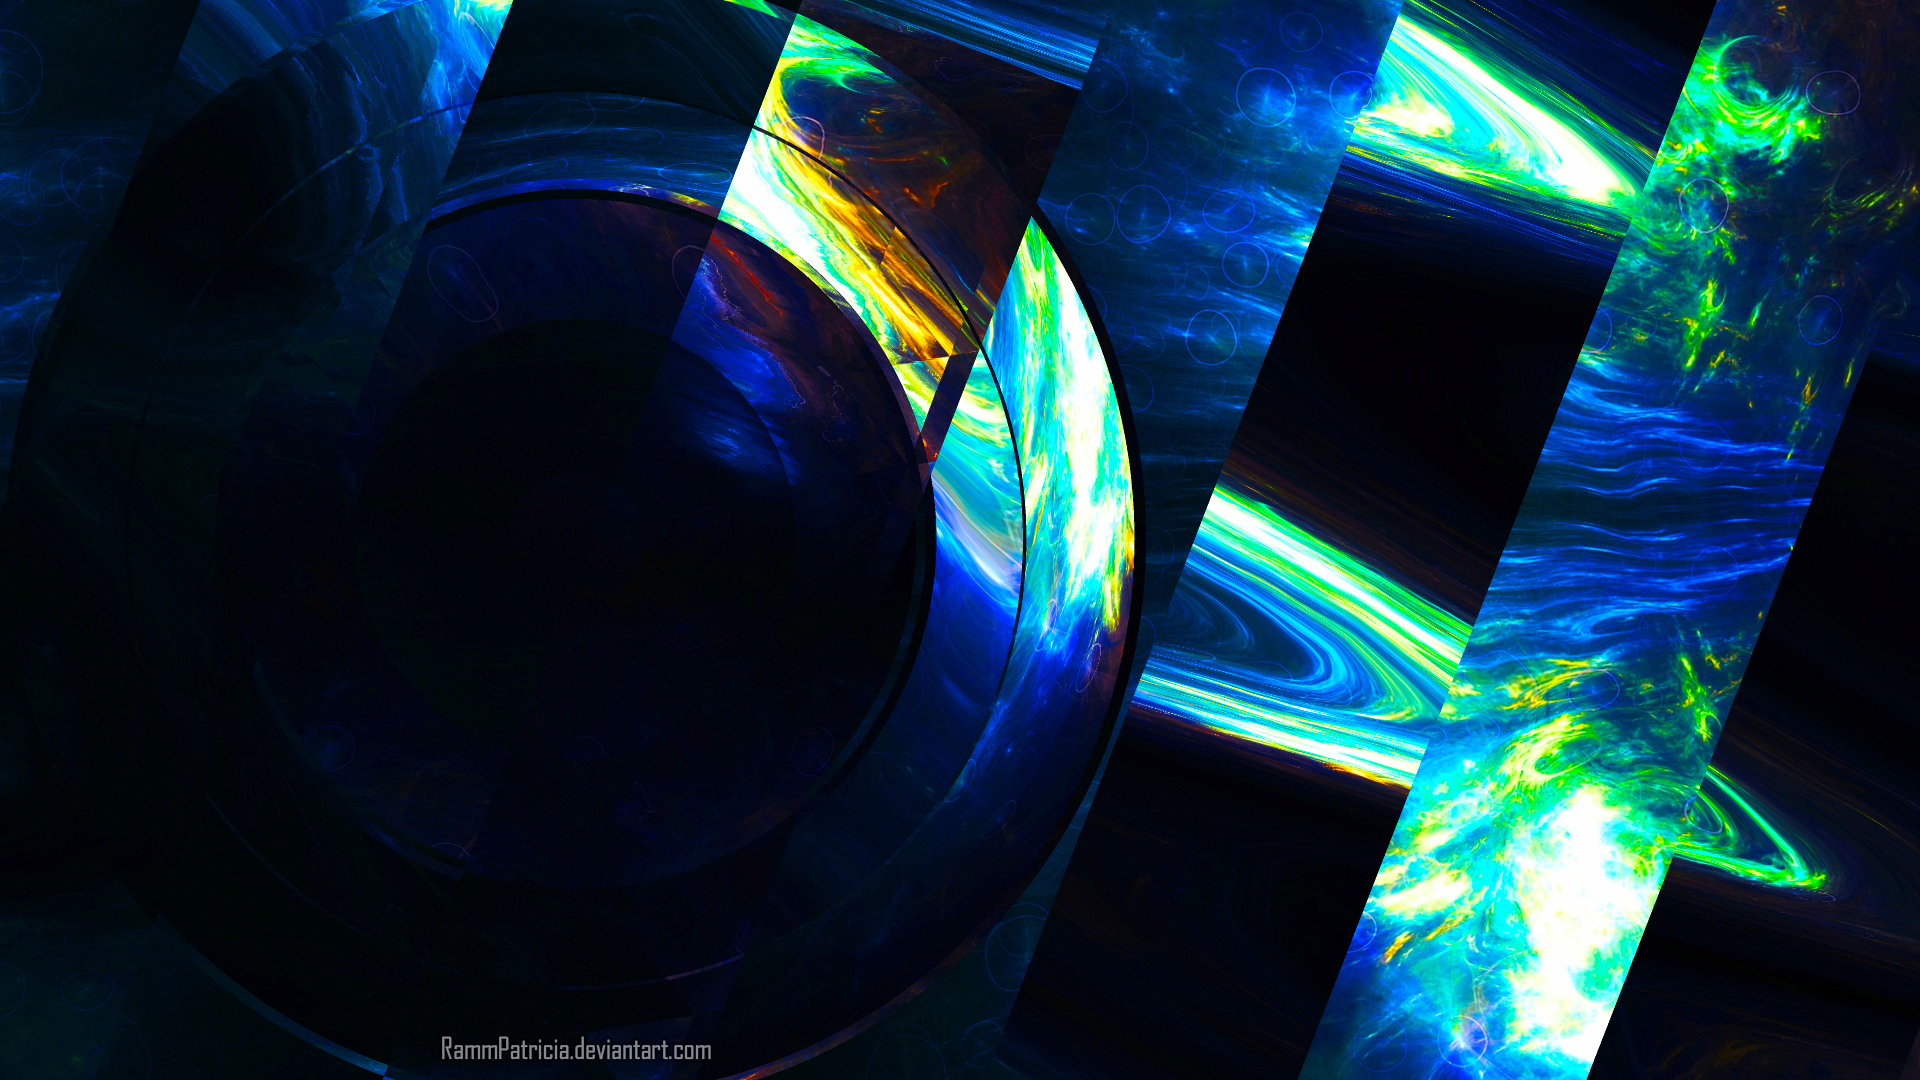 RammPatricia Digital Abstract Digital Art Science Fiction Watermarked Space Planet Saturn 1920x1080